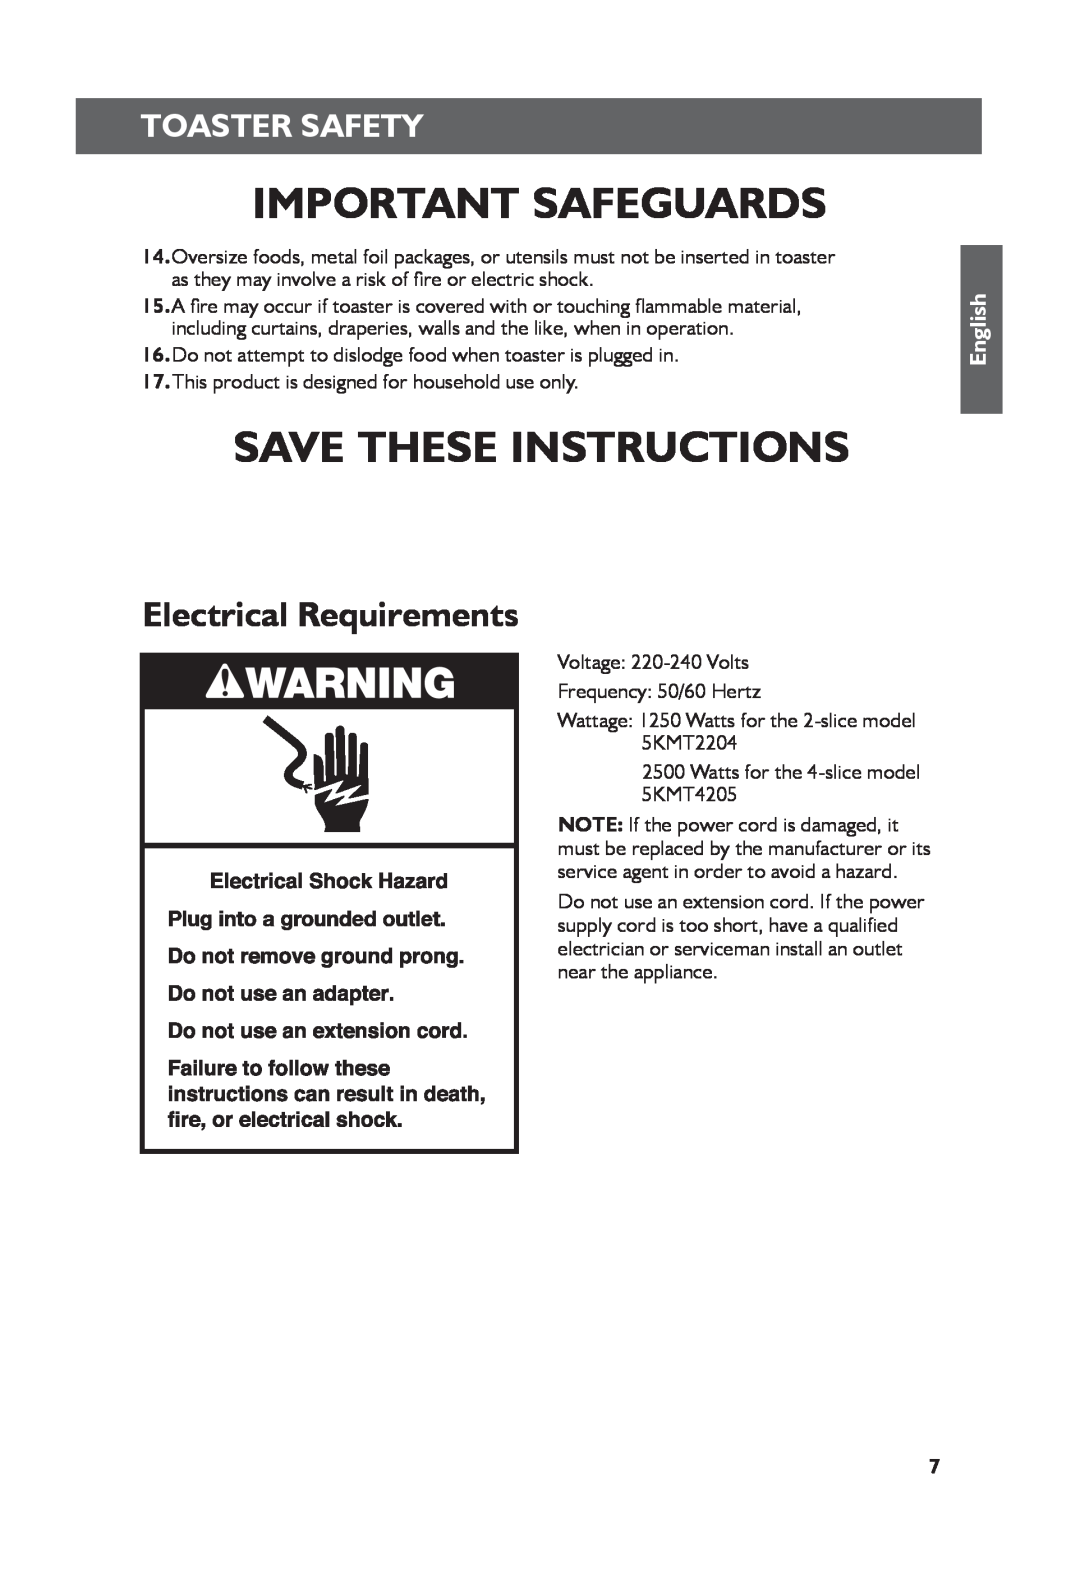 KitchenAid 5KMT2204 manual Important Safeguards, Save These Instructions, Electrical Requirements, Toaster Safety, English 